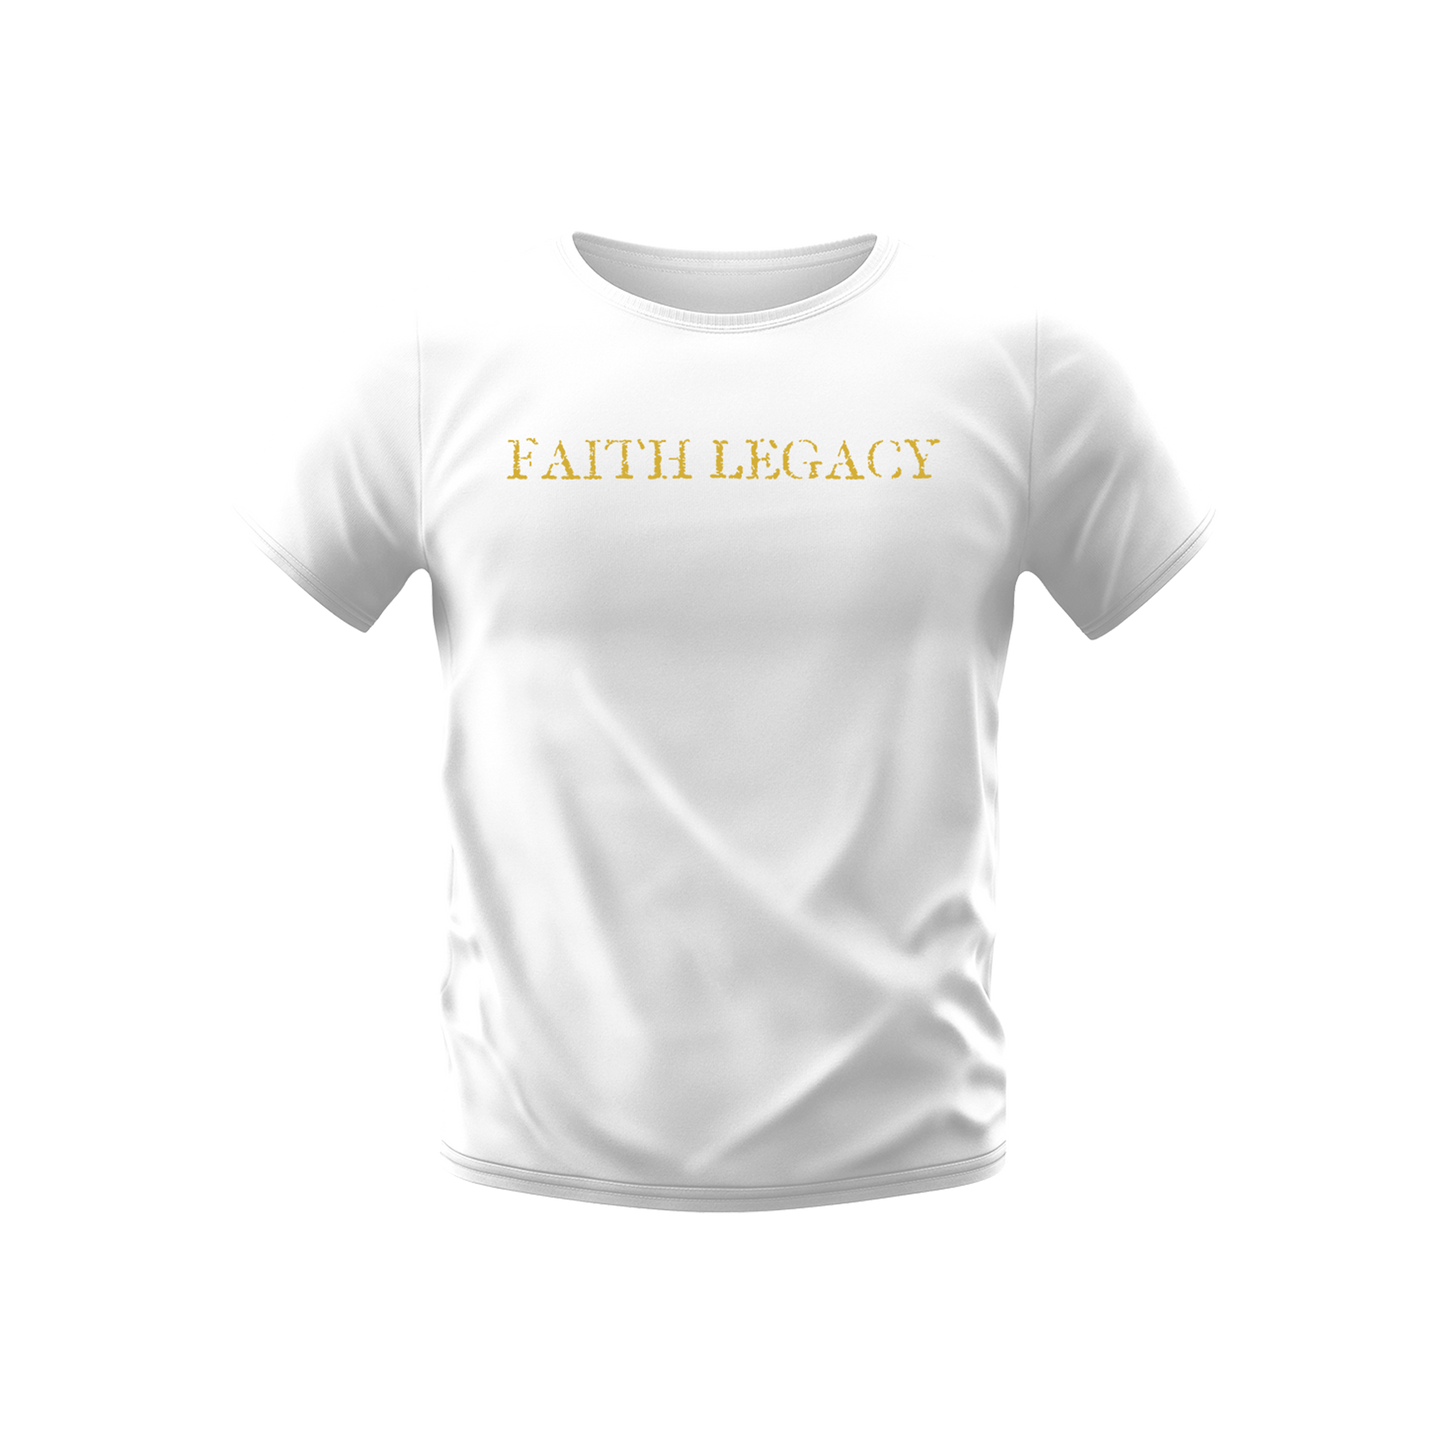 TO LIVE IS CHRIST, TO DIE IS GAIN - FAITH LEGACY TEE